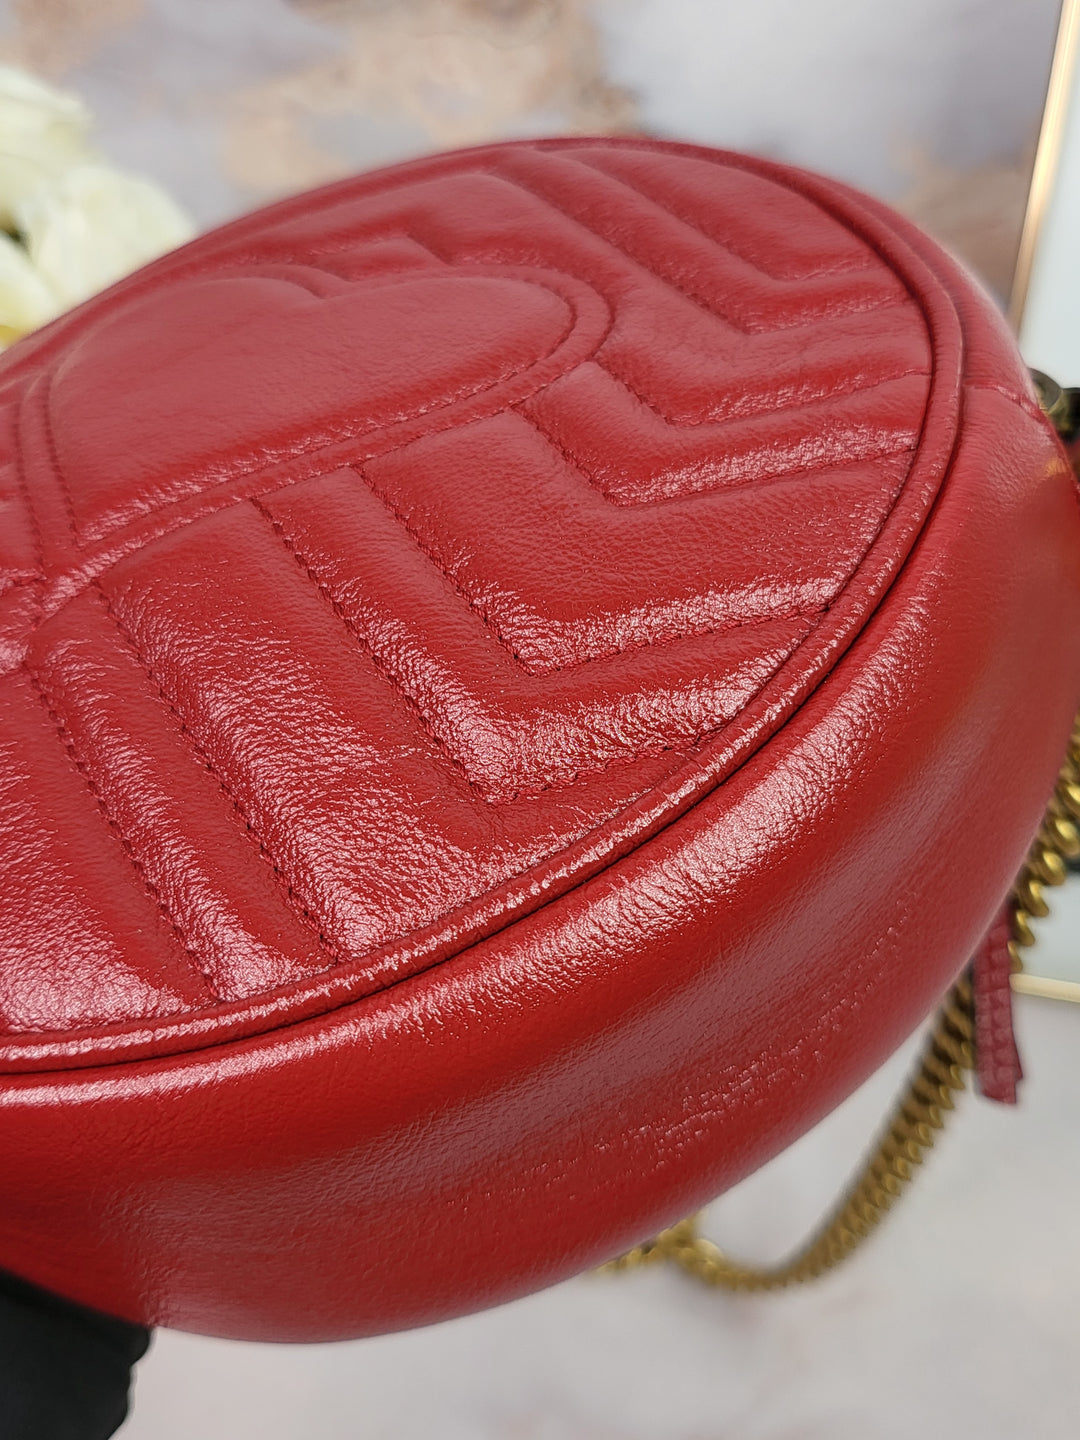 Gucci Marmont Round Red Crossbody